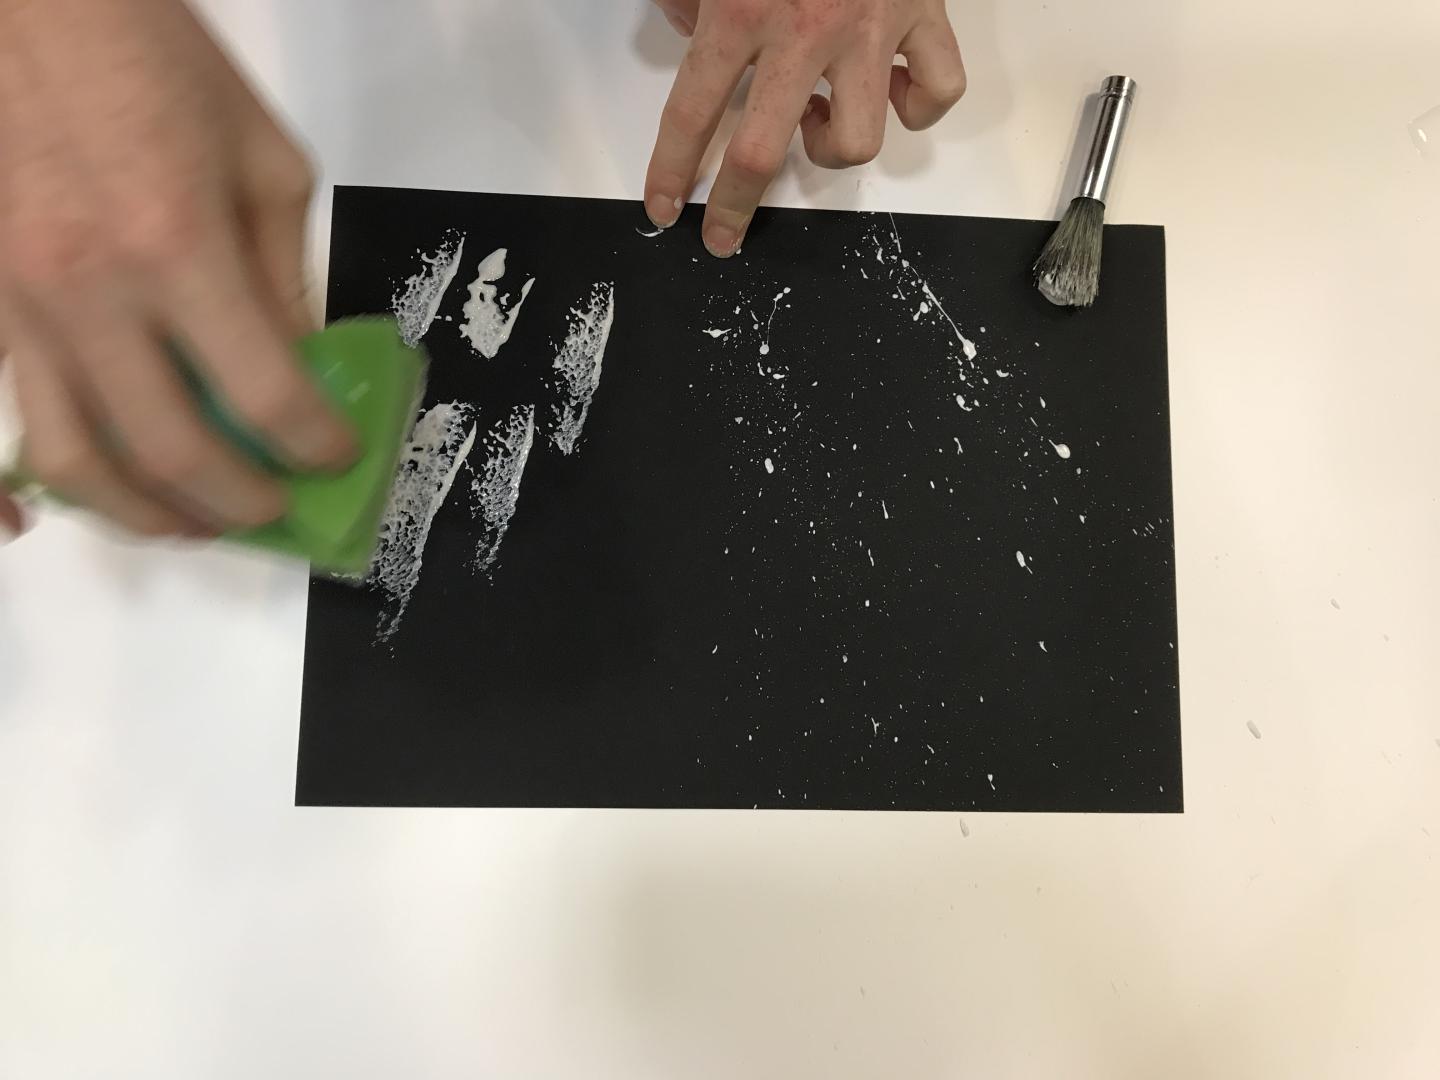 White paint has been flicked onto black card and someone is using a sponge to add more white paint.